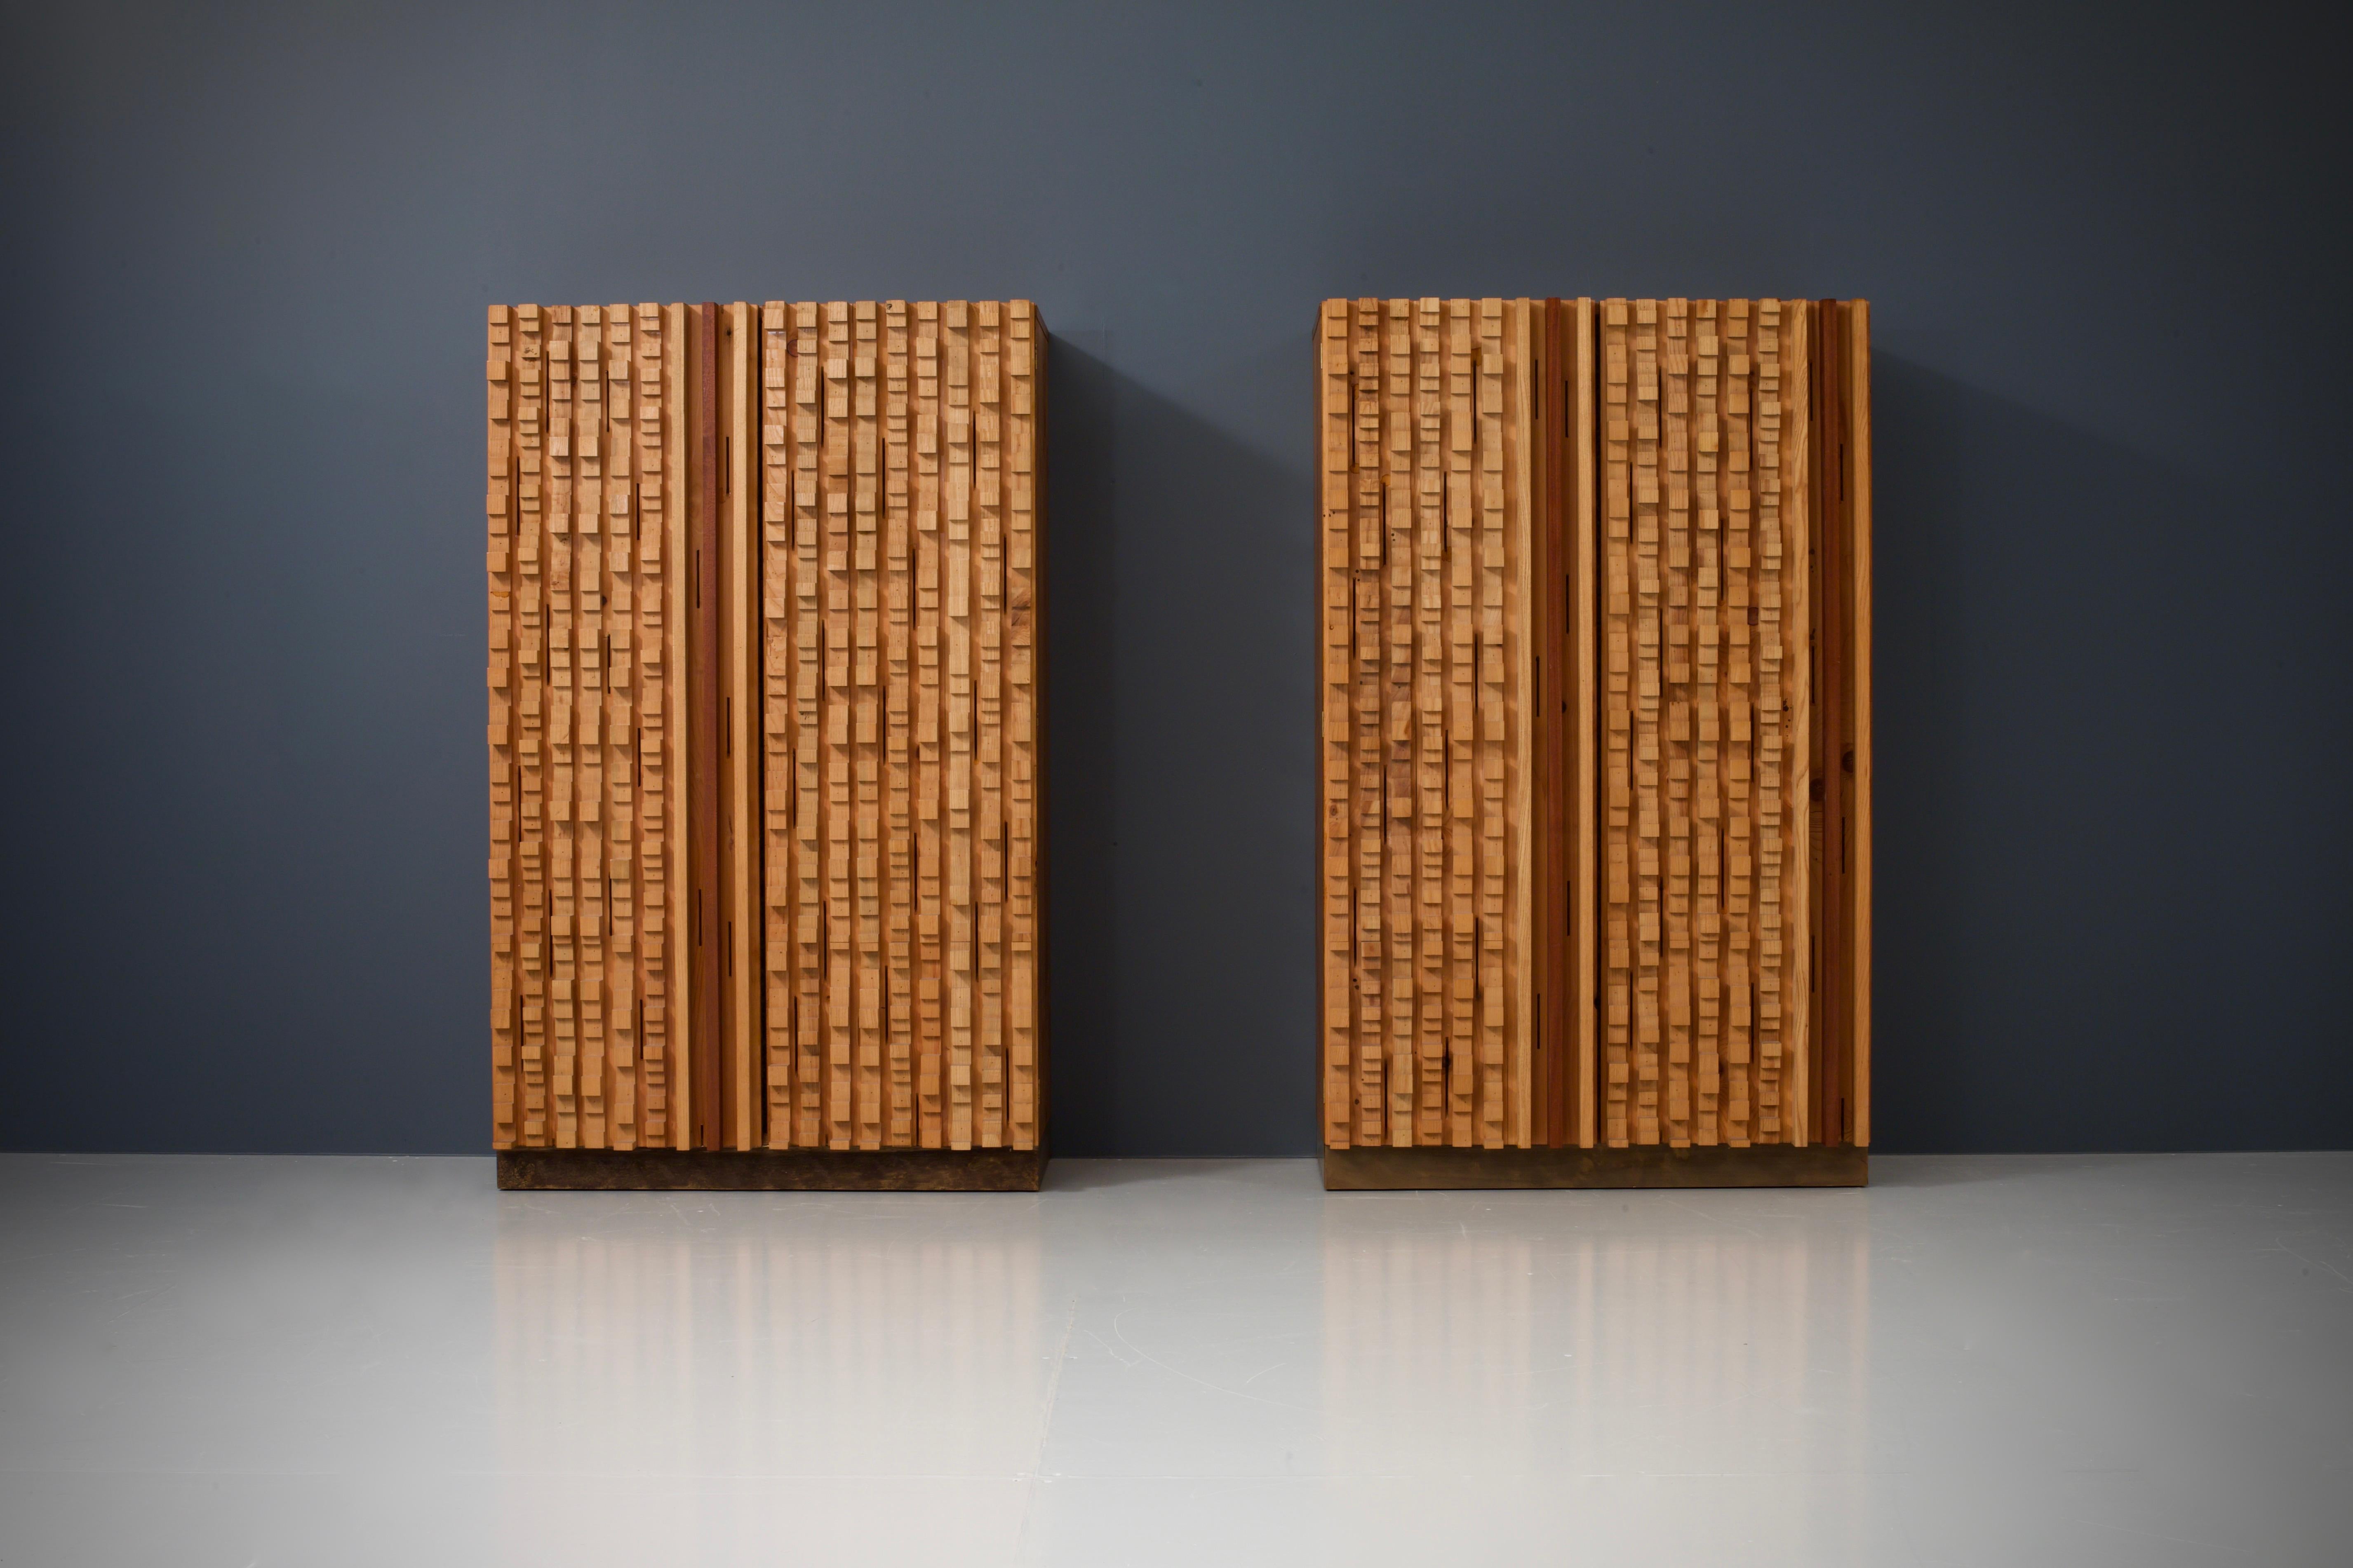 Two Brutalist cabinets by the Italian sculptor Stefano d’Amico in beech and brass details, signed and dated, 1974.

There is not so much known about D'Amico's work apart from that he held expositions in Milan and Genova in the late 1960s and that he